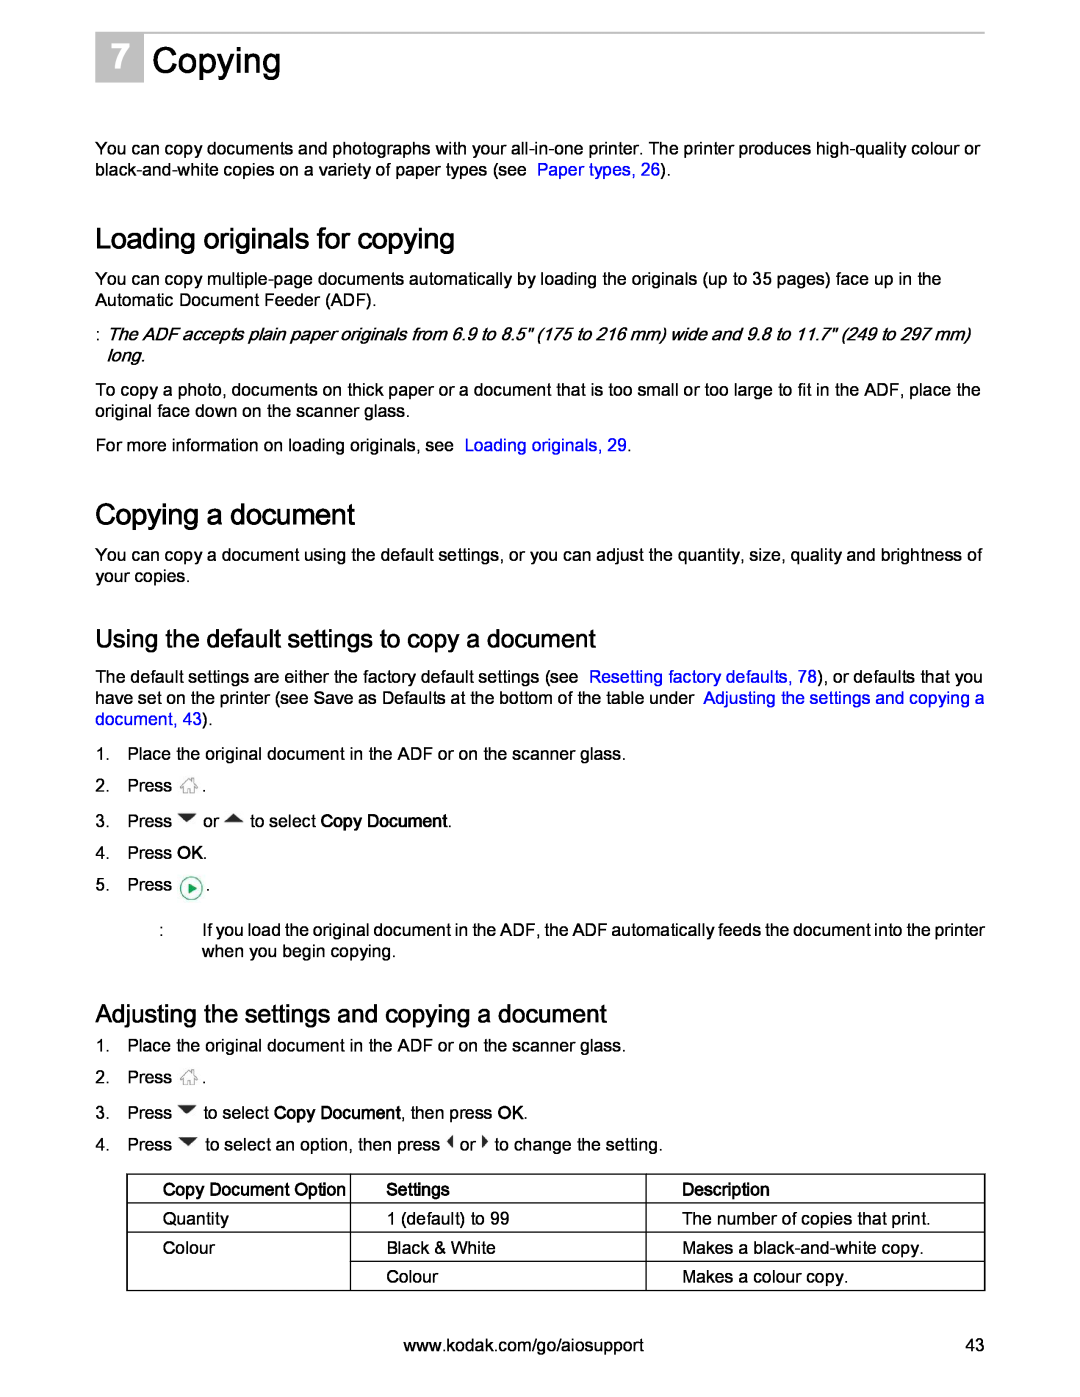 Kodak 2.2 Loading originals for copying, Copying a document, Using the default settings to copy a document, Settings 